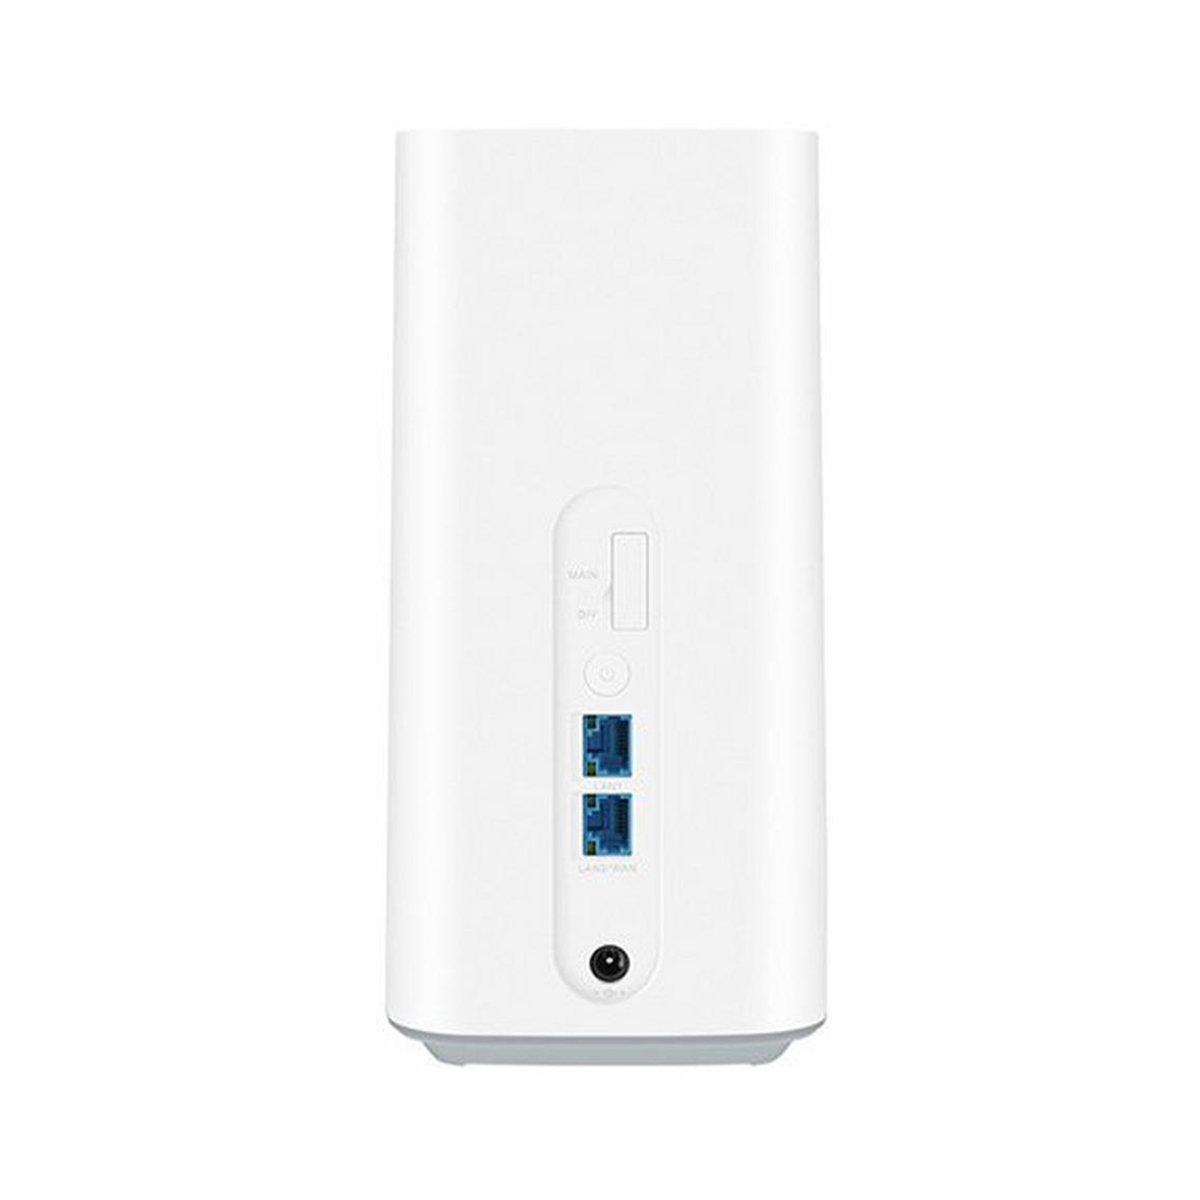 Huawei 5G Router H112-372 White